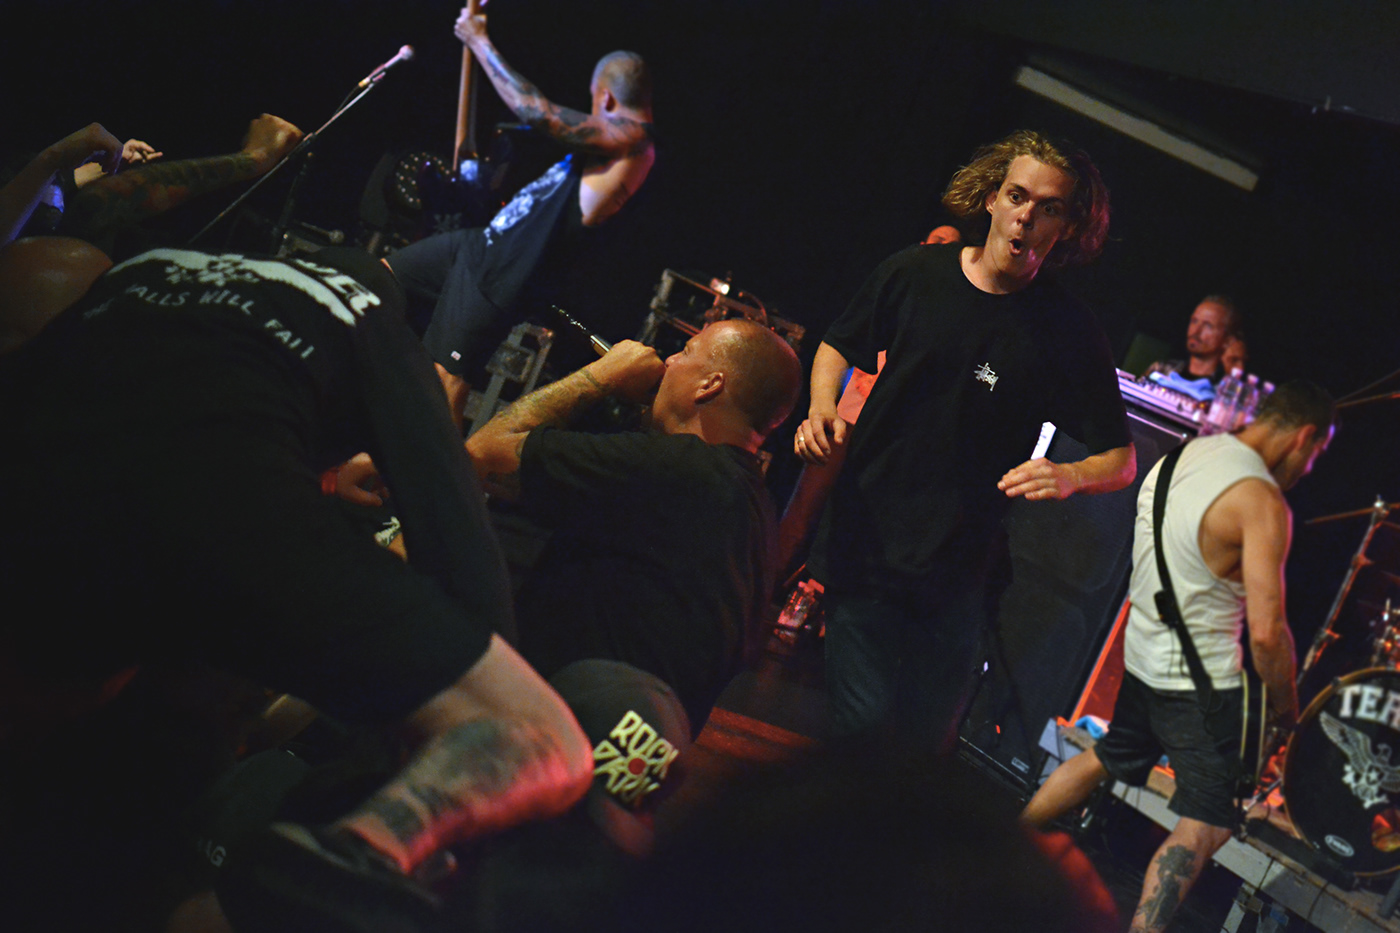 HC music Show concert Photography  Terror modernlifeiswar CroMags higherpower incendiary